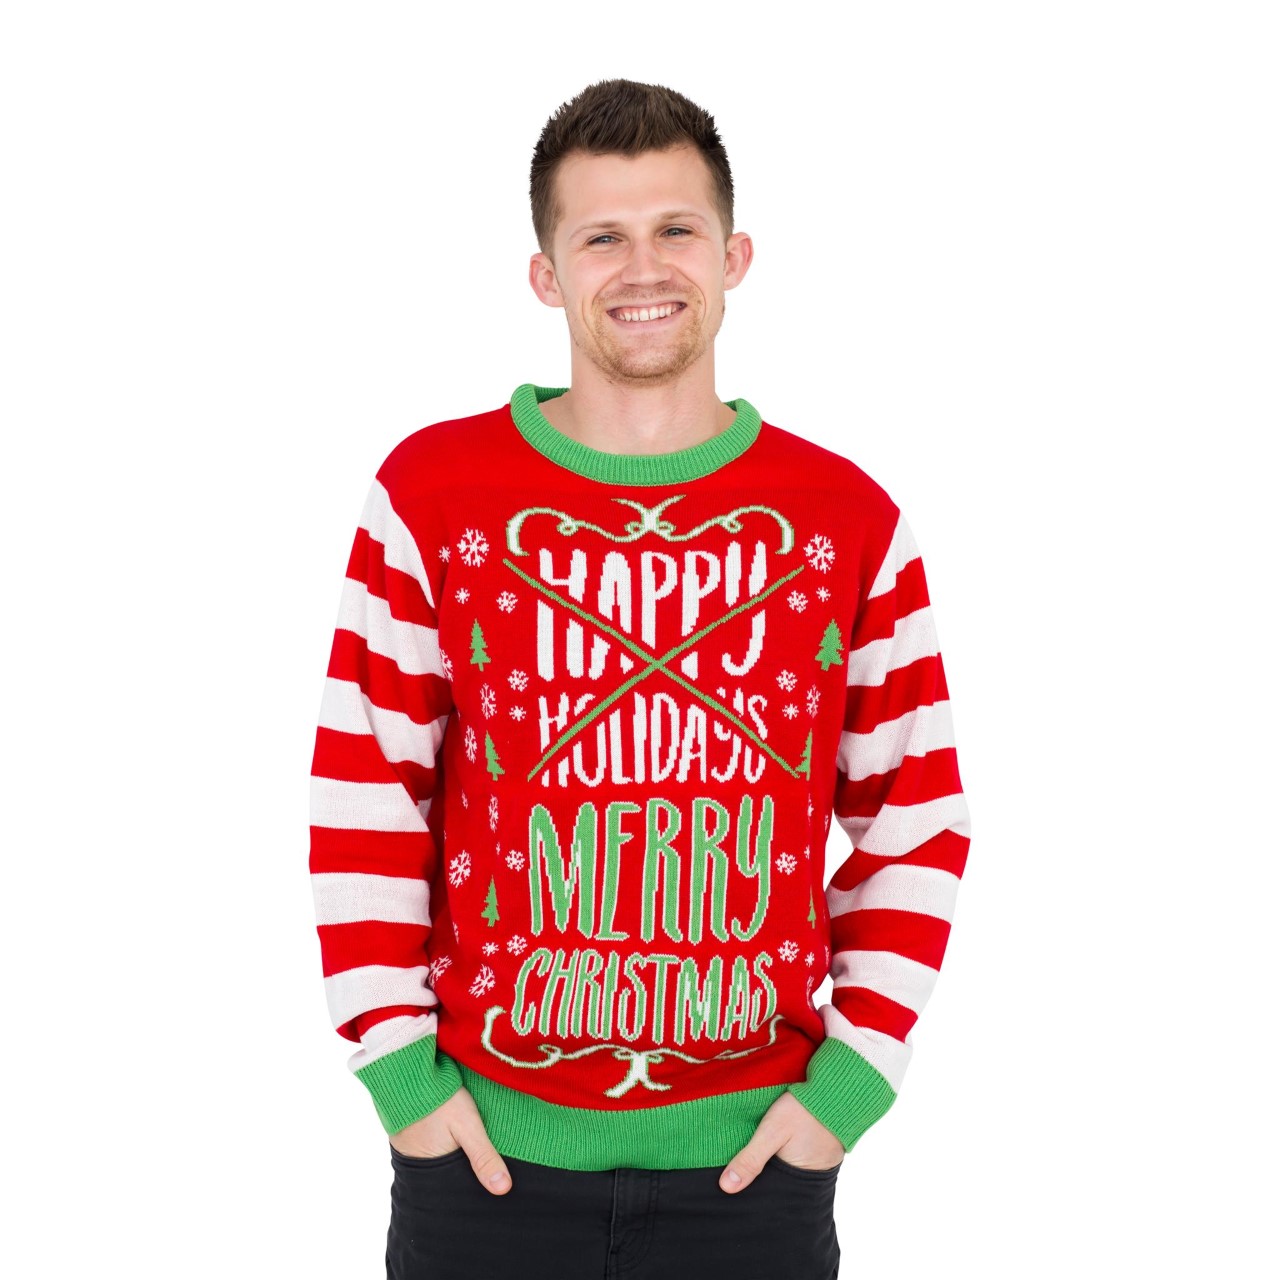 Happy Holidays Merry Christmas Sweater,Ugly Christmas Sweaters | Funny Xmas Sweaters for Men and Women